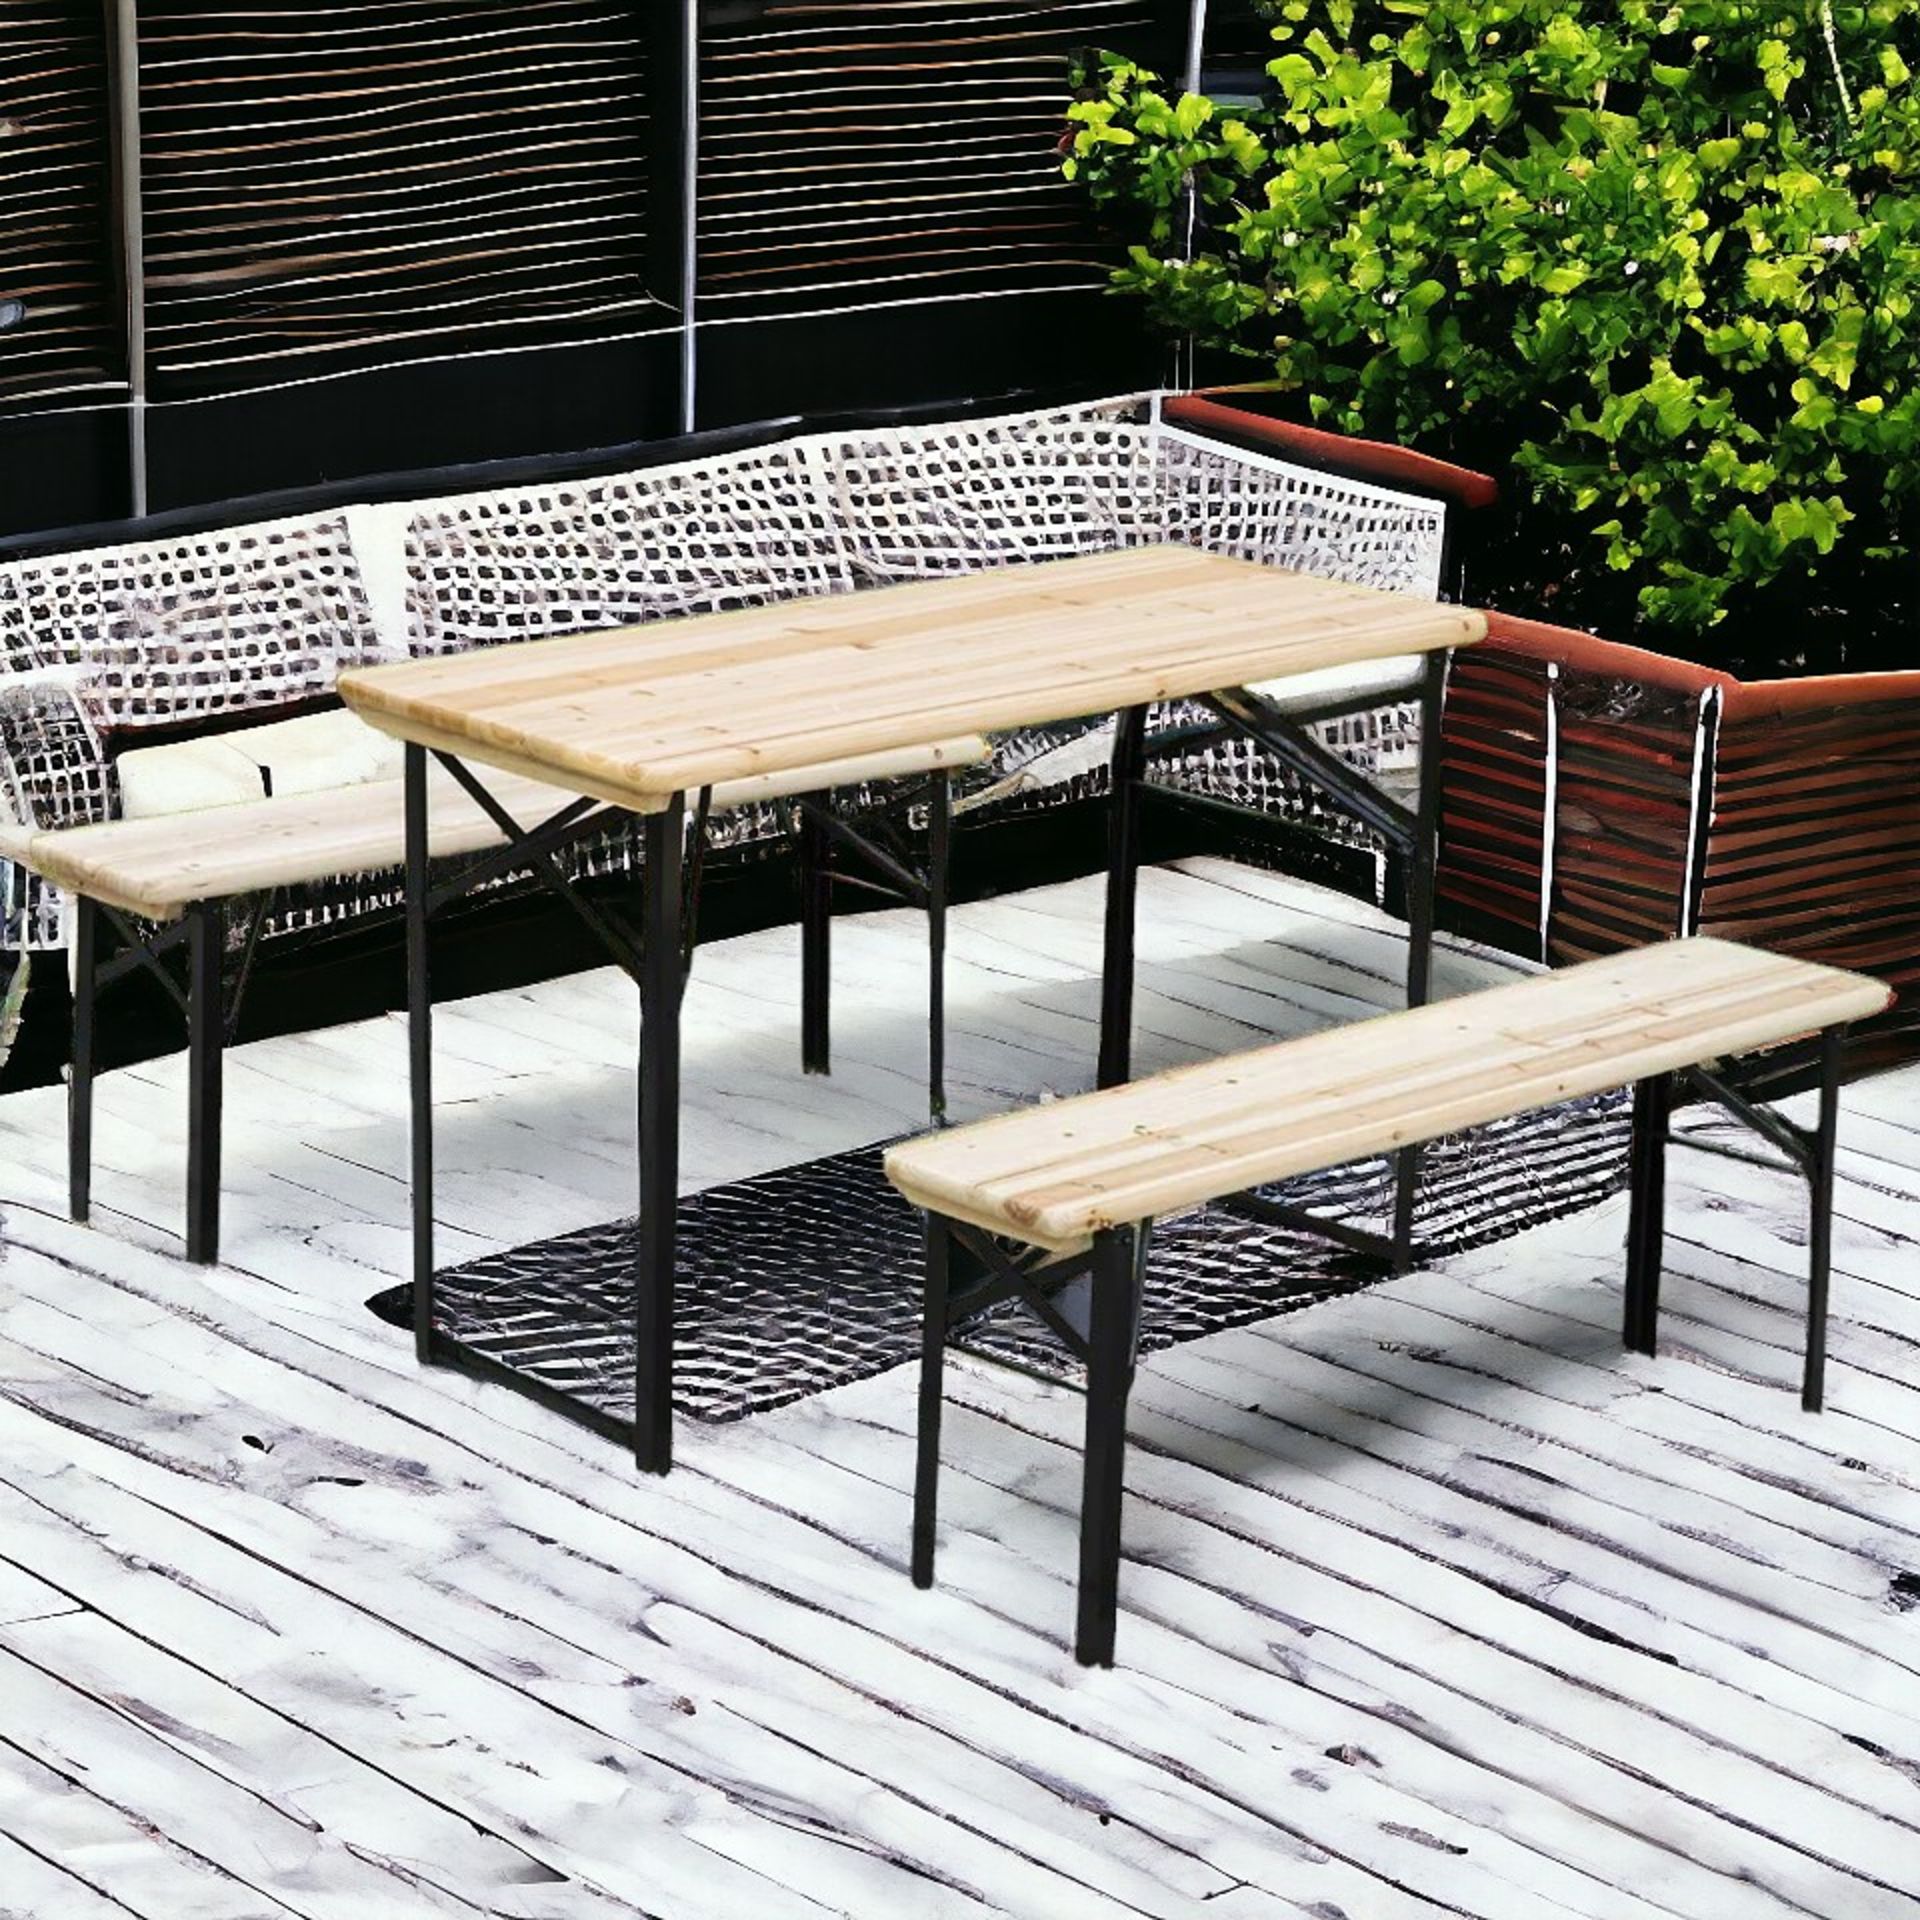 FREE DELIVERY - BRAND NEW OUTDOOR PICNIC TABLE PORTABLE FOLDING CAMPING PATIO BEER TABLE SET - Image 2 of 2